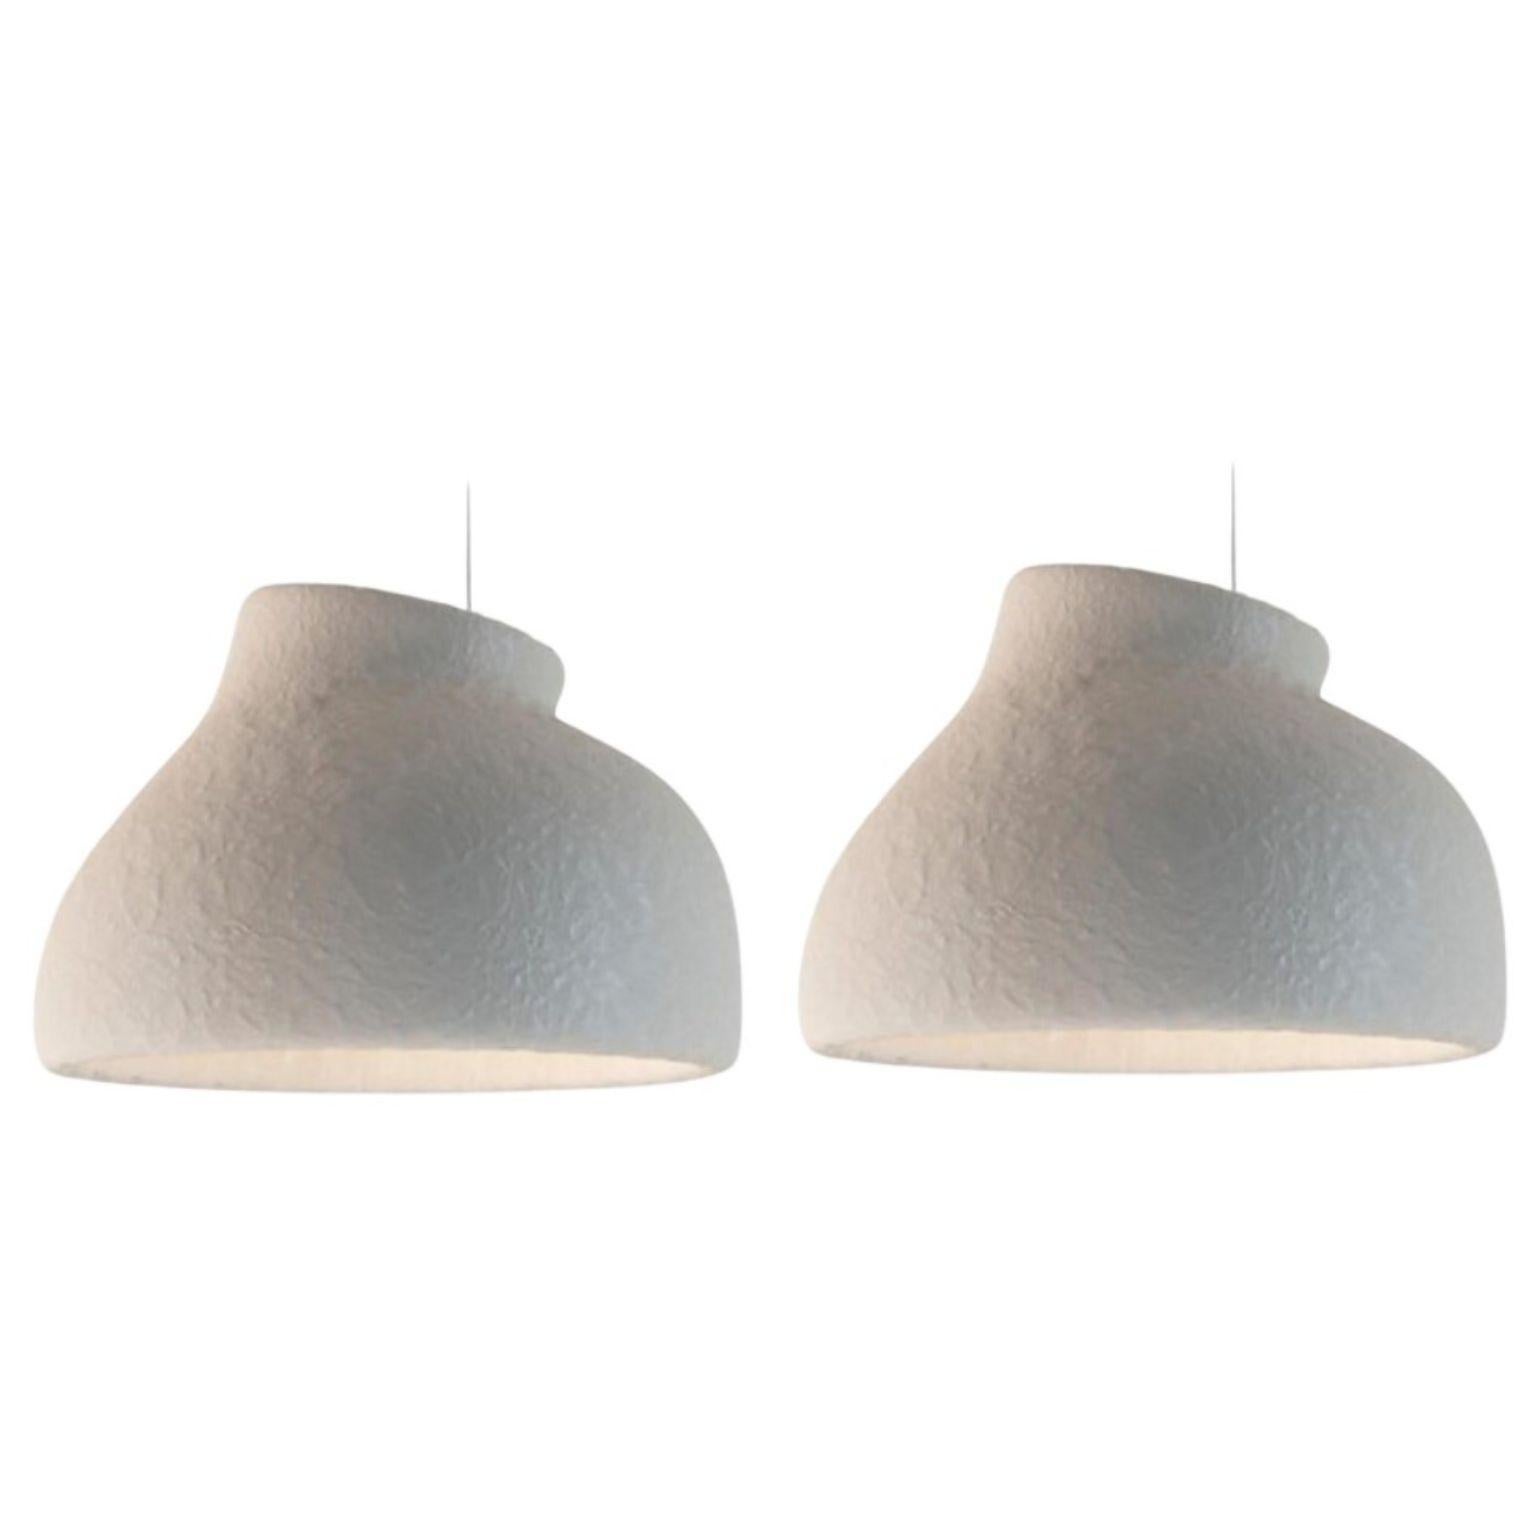 Set of 2 Medium pendant lamps by Faina
Design: Victoriya Yakusha
Materials: a blend of upcycled steel, flax rubber, wood chips, cellulose, and clay all with biopolymer cover.
Dimensions: D 80 x H 56 cm
Available in 12 colors. 

SONIAH tends